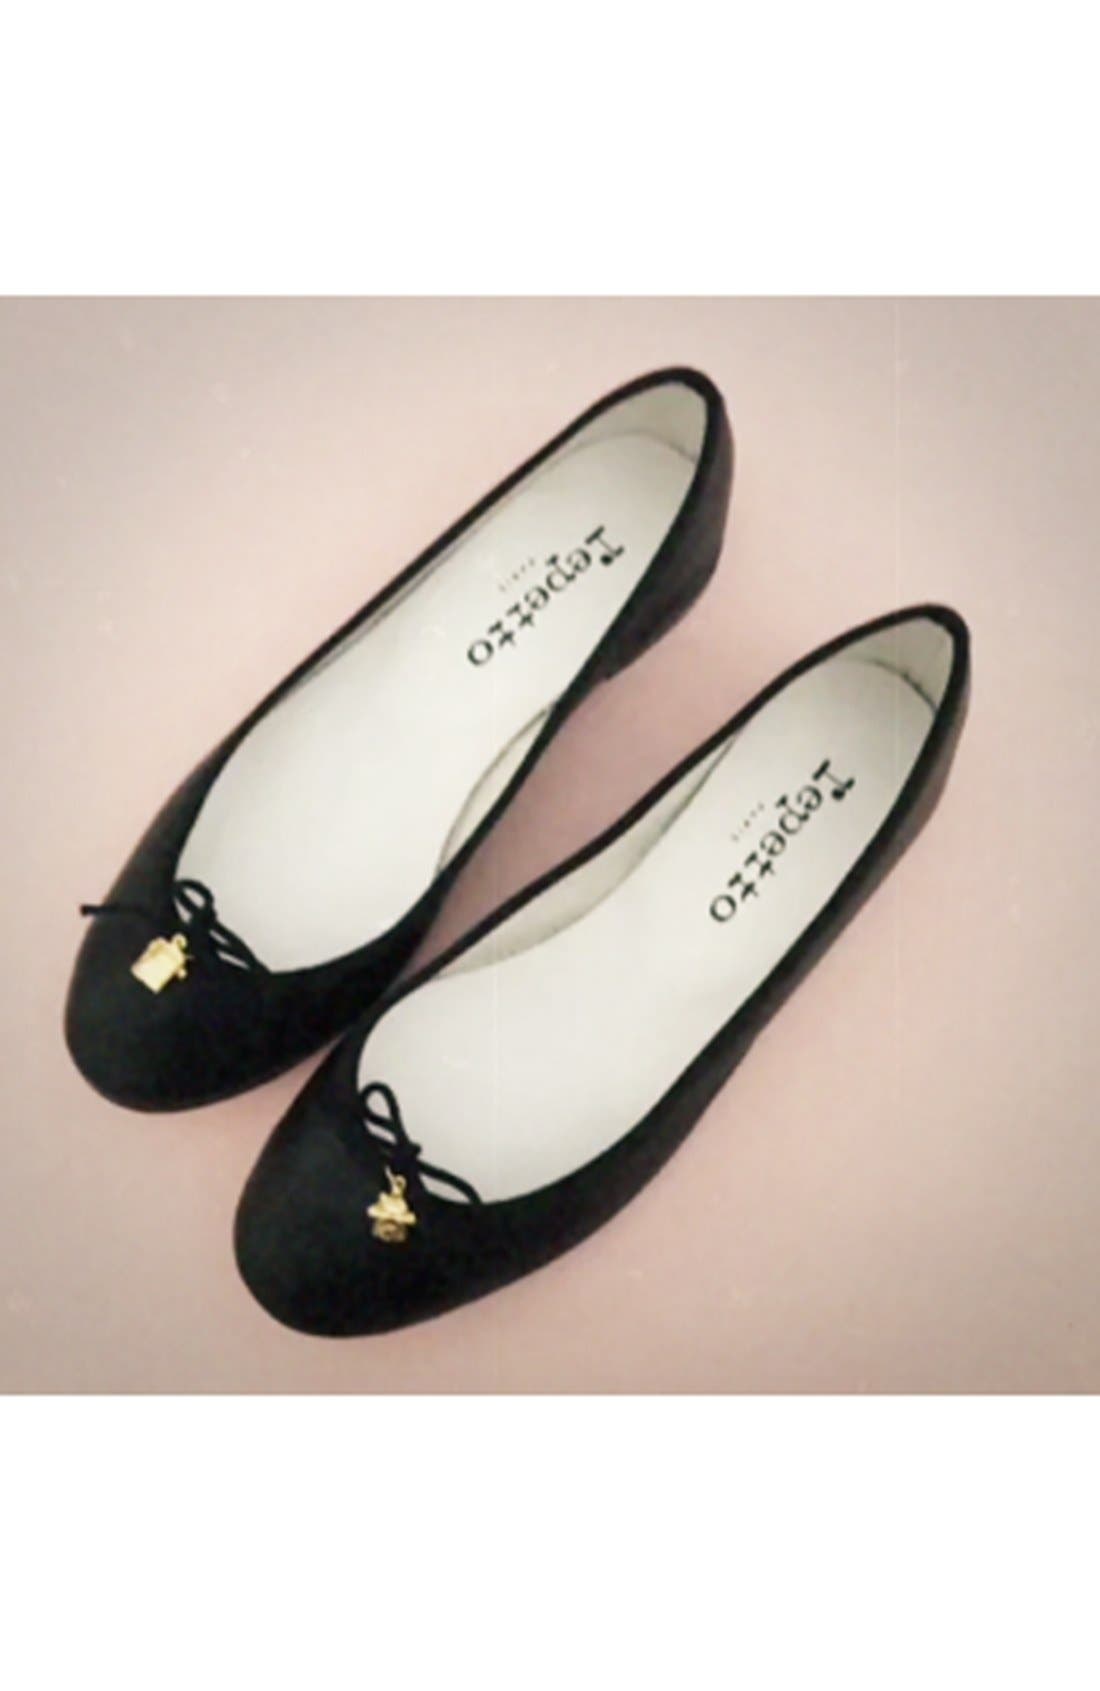 repetto shoes nordstrom